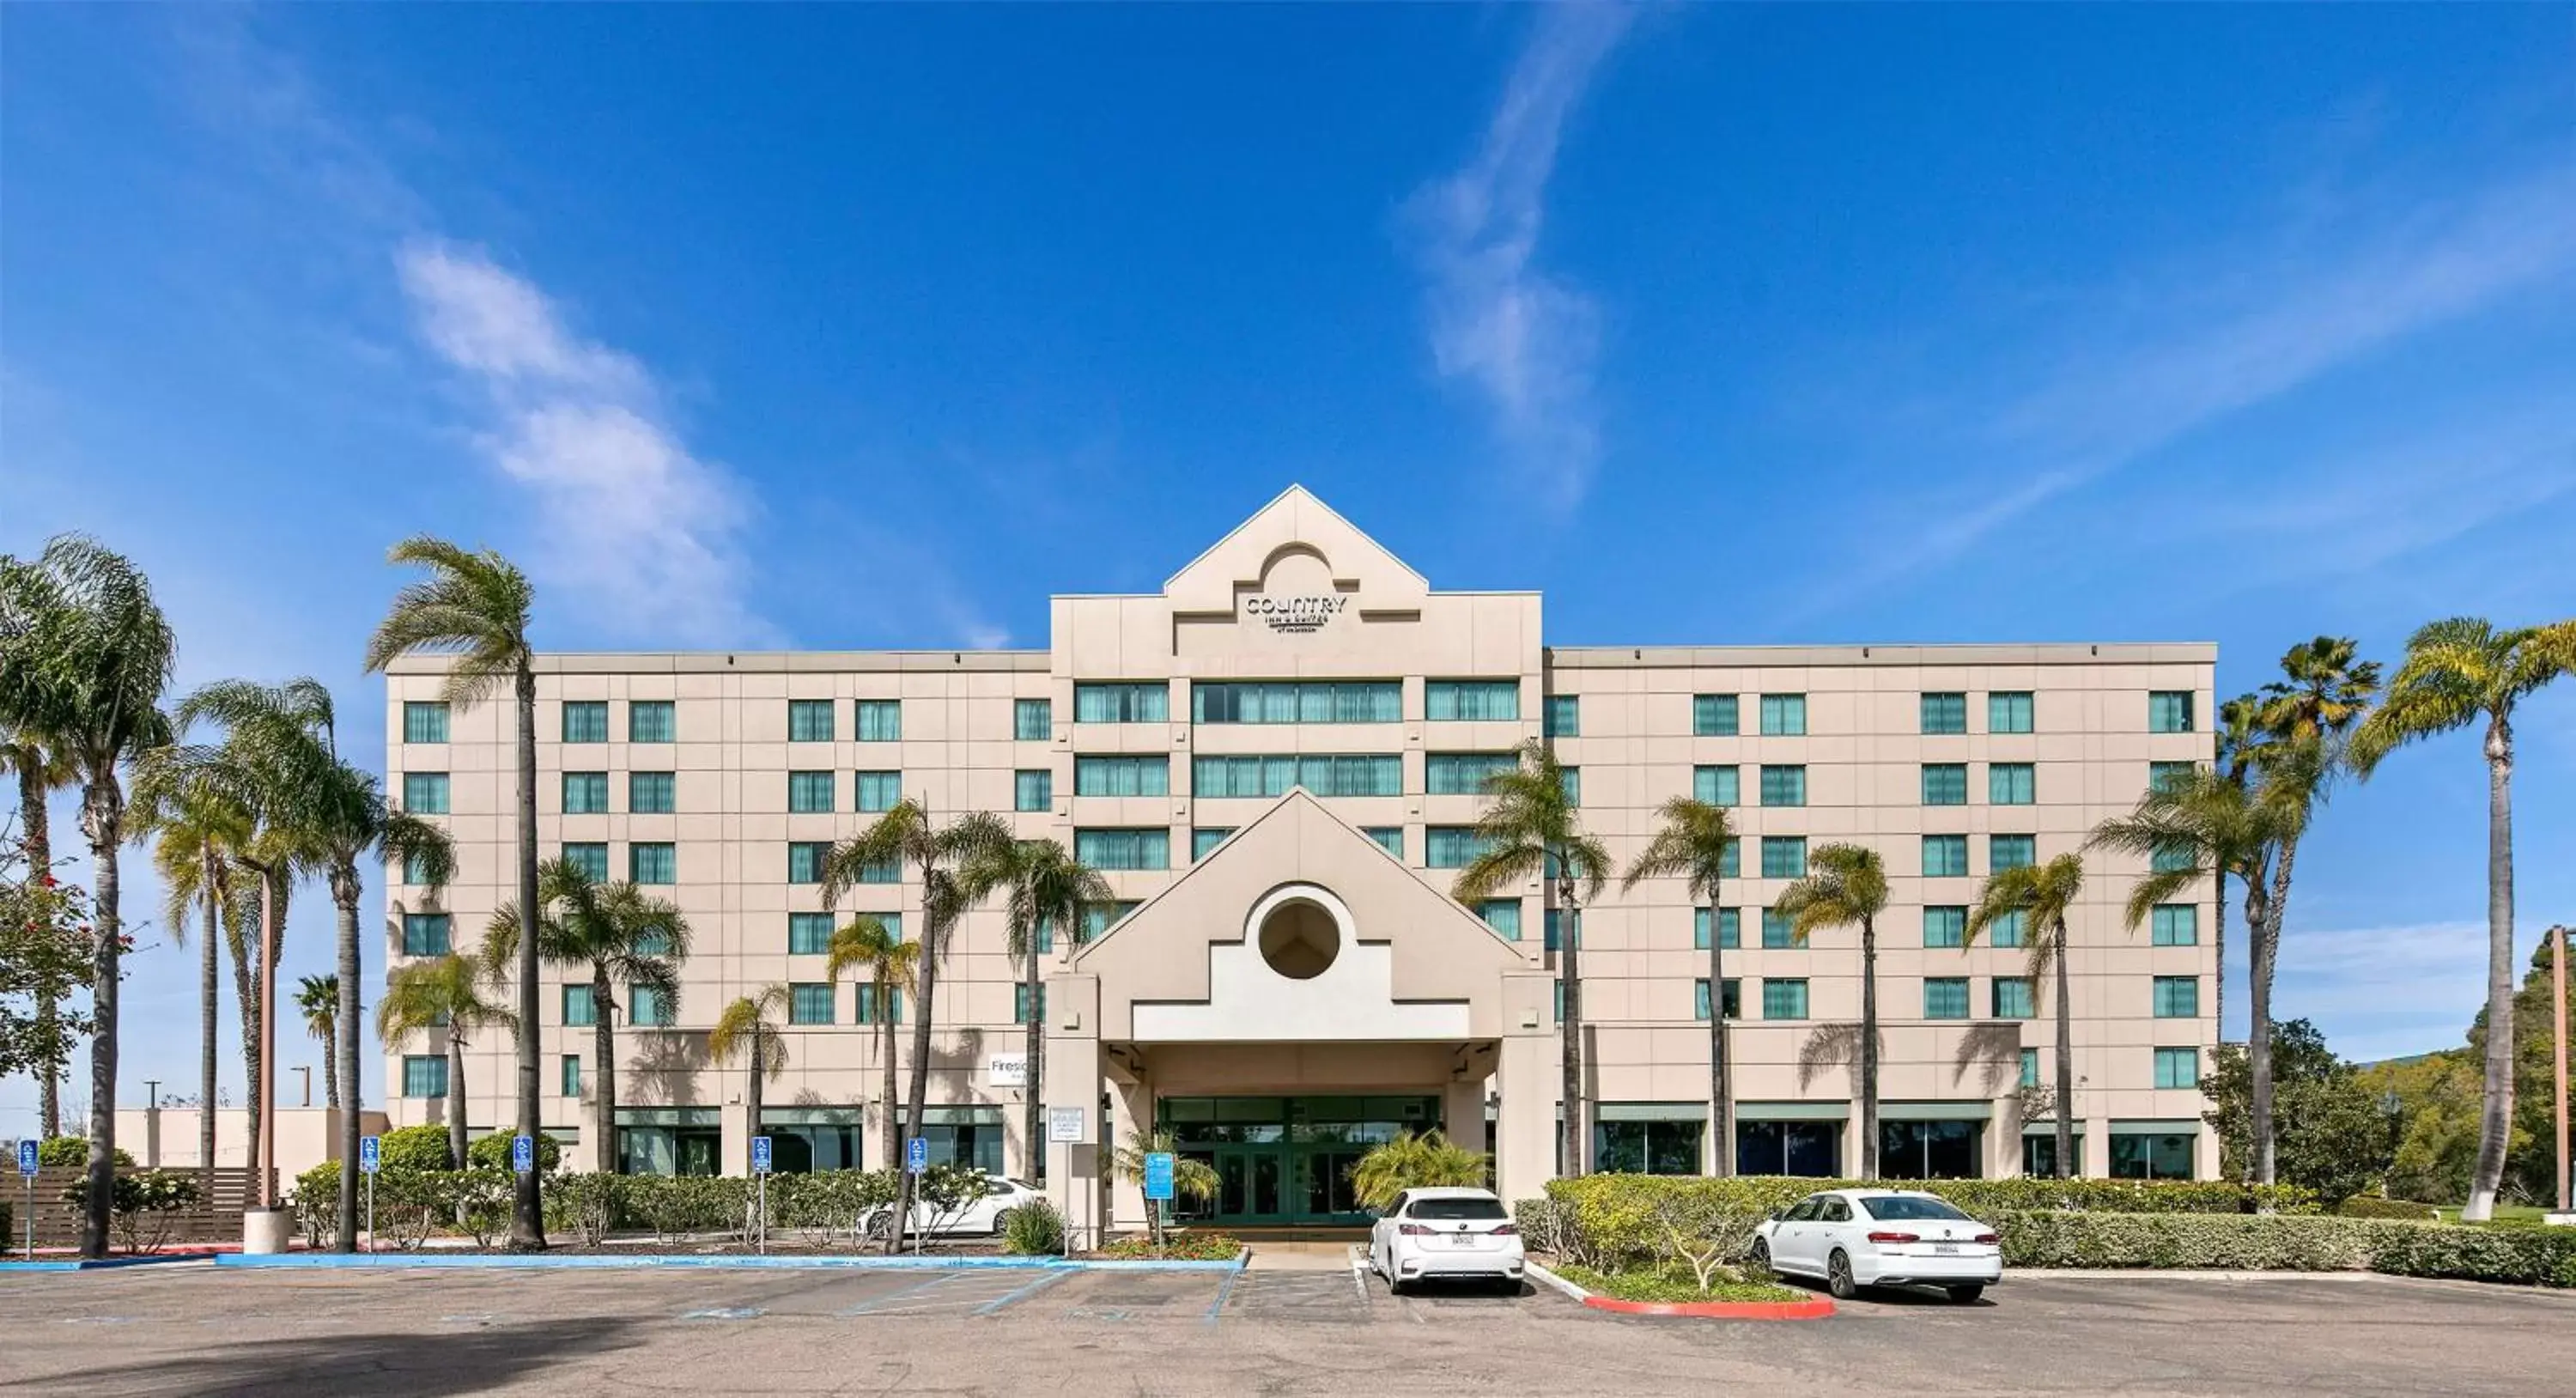 Property Building in Country Inn & Suites by Radisson, San Diego North, CA